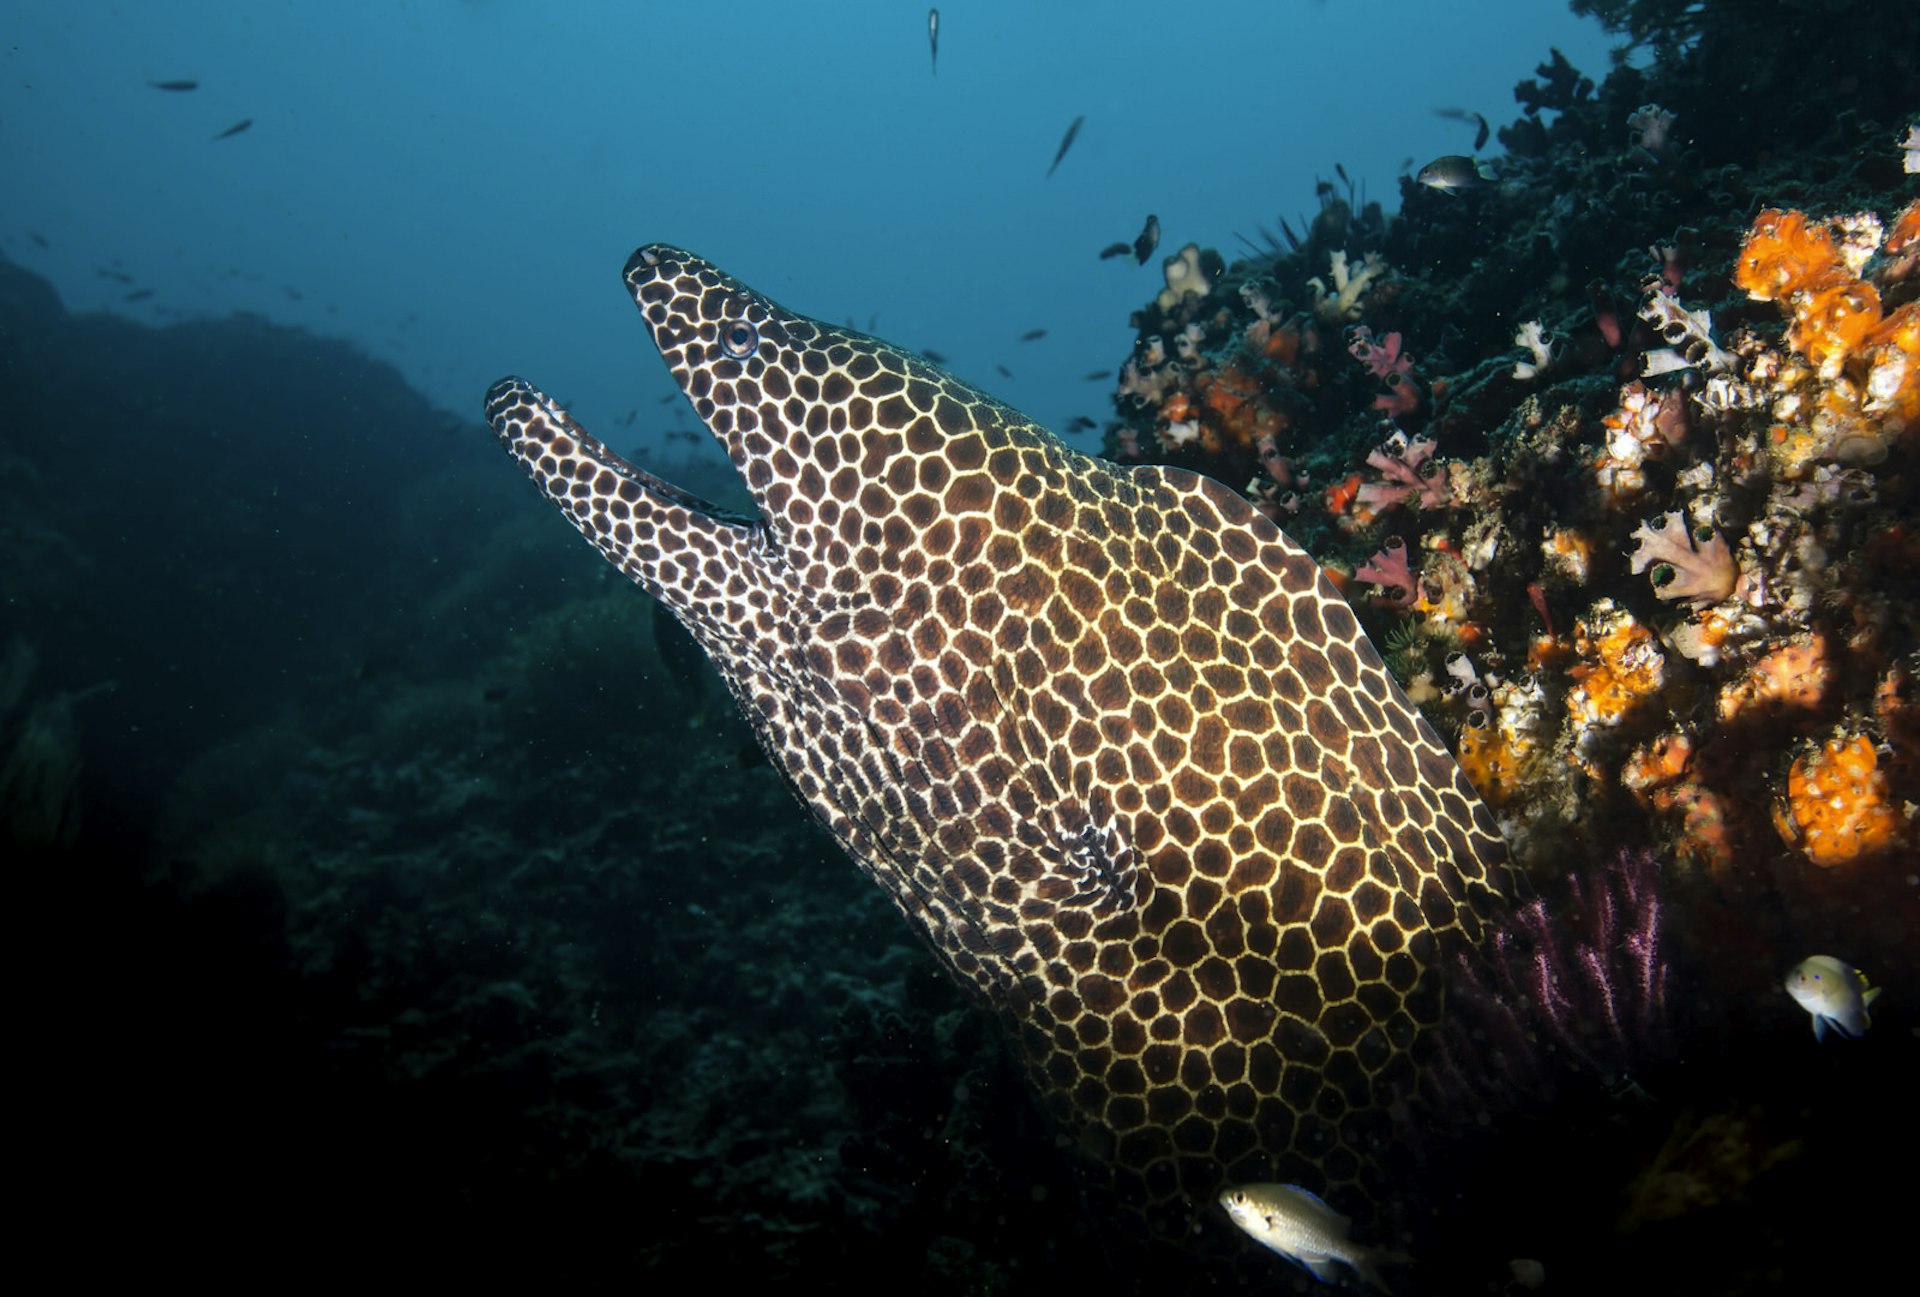 Honeycomb moray eel protruding out of coral shot from below against blue background © Liquid_Light / Getty Images